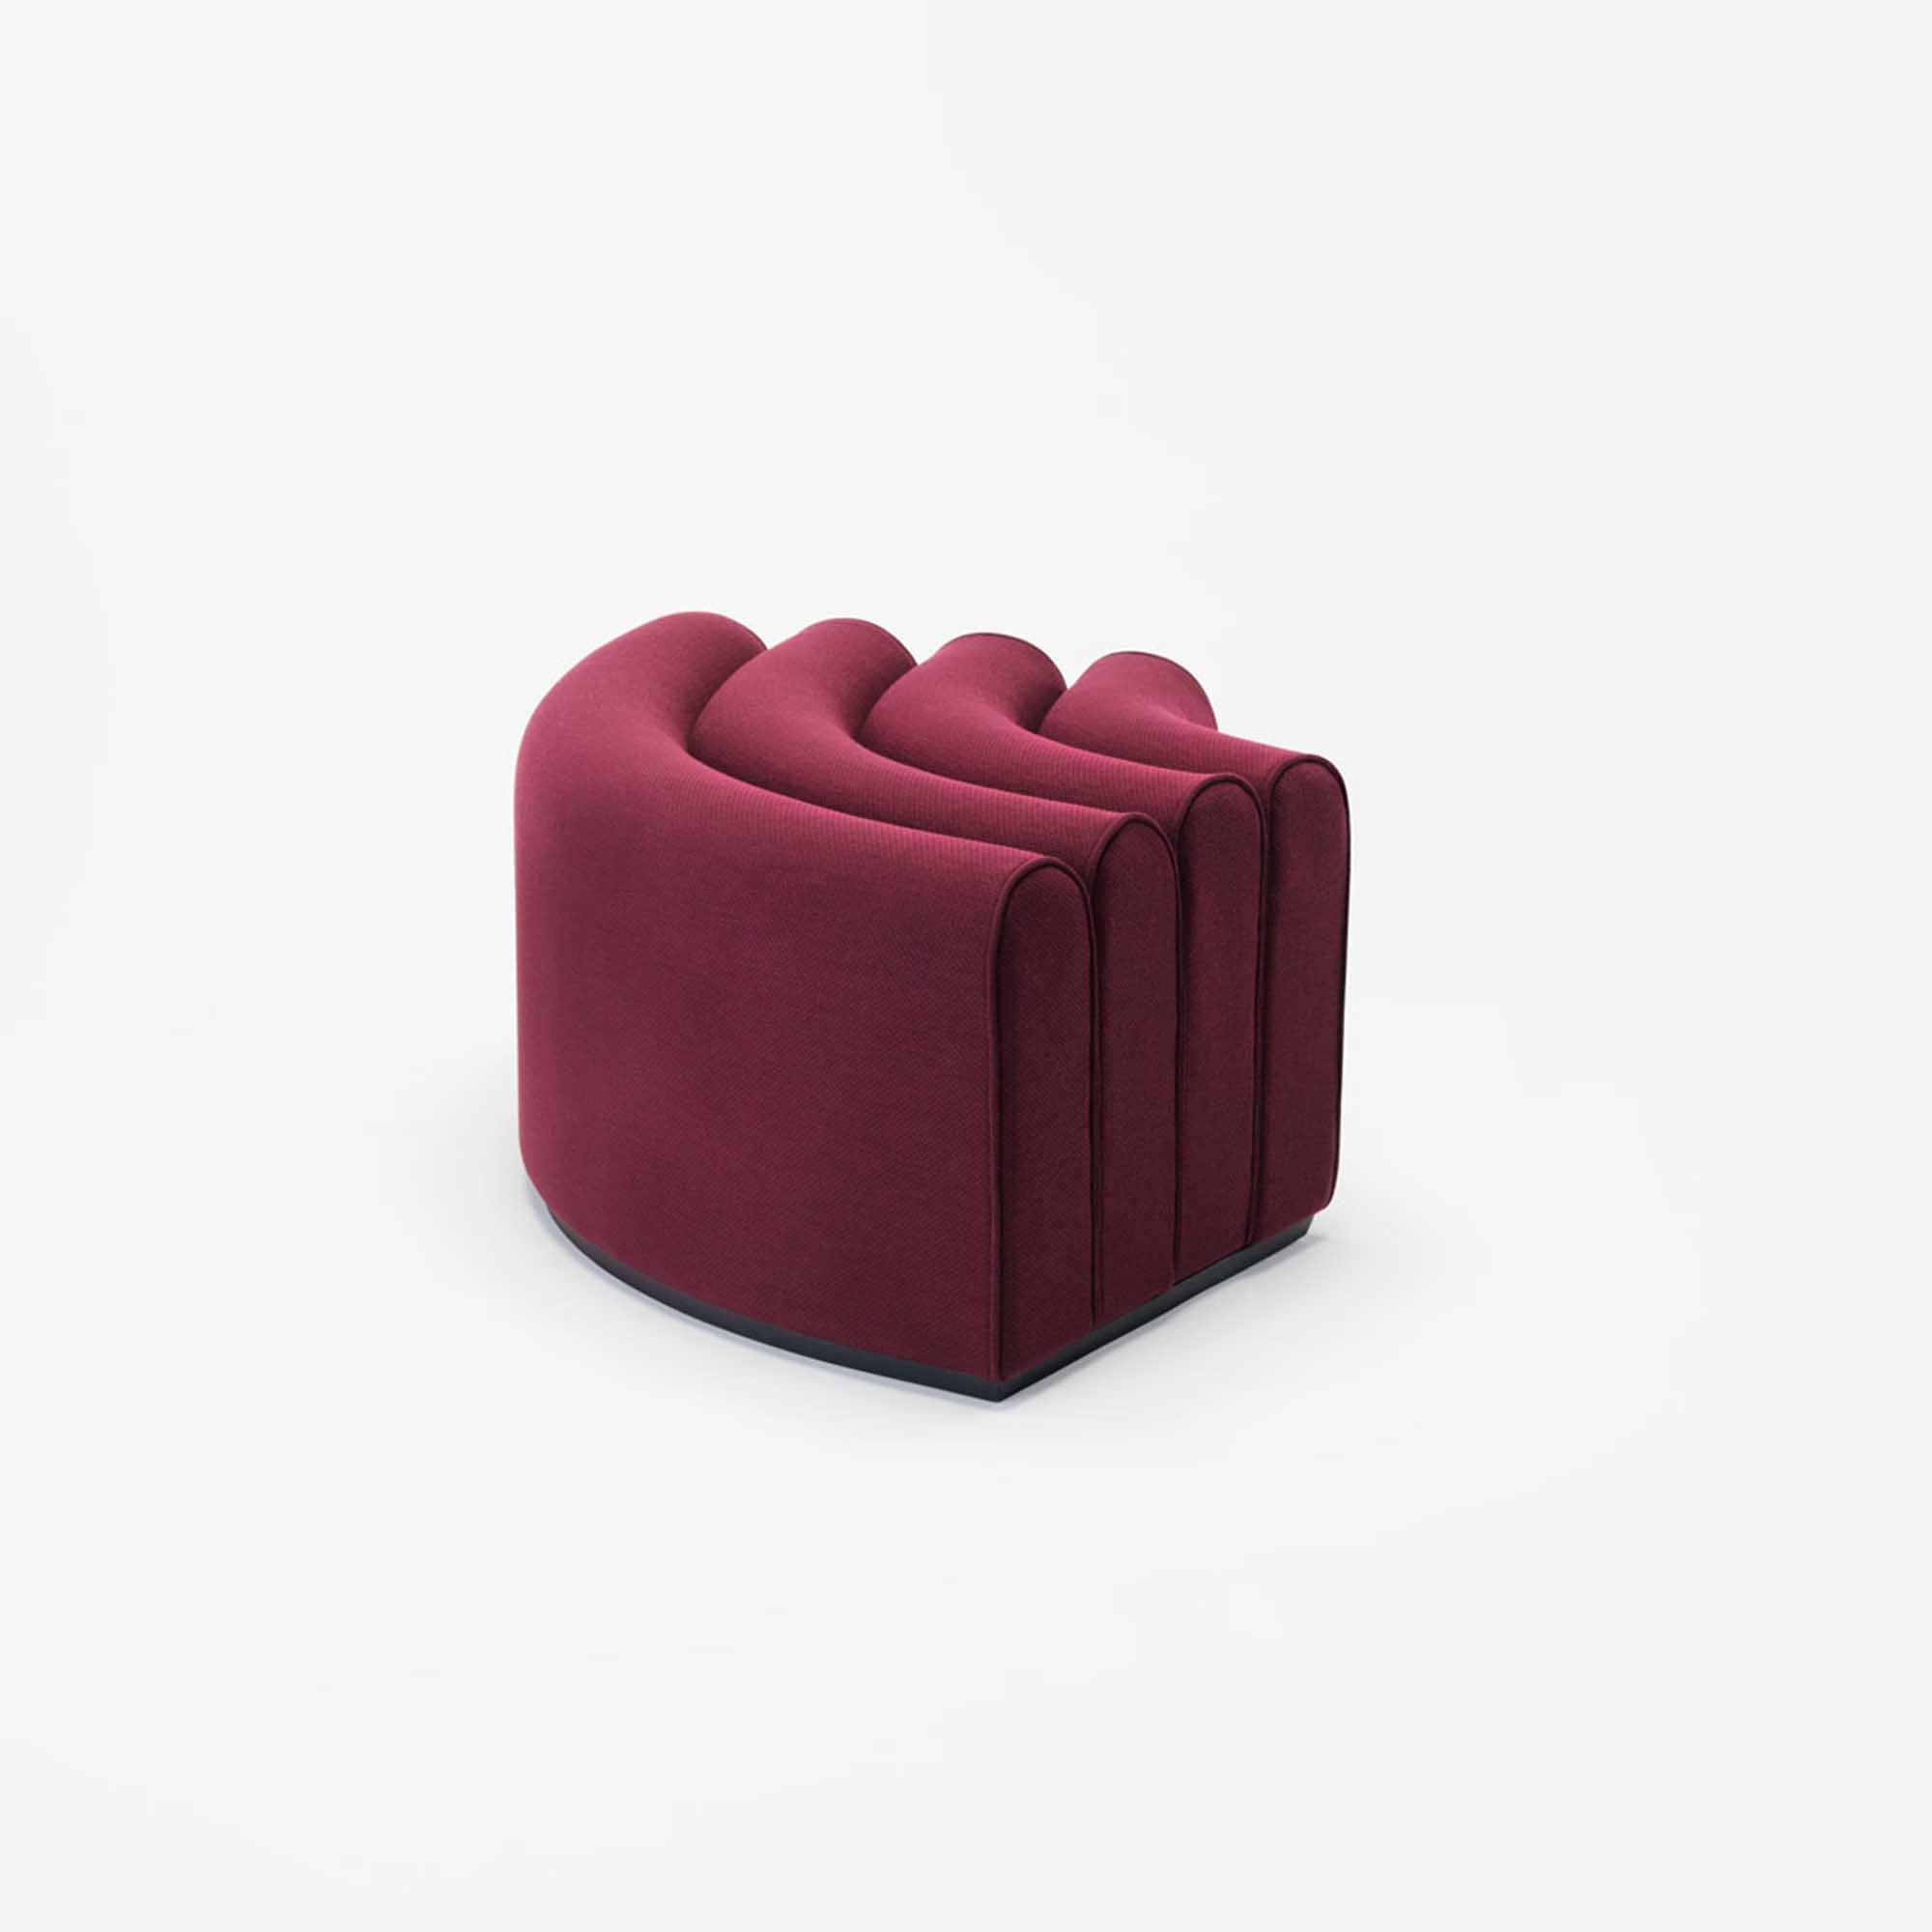 ARKAD Corner Pouffe Cherry Large side view